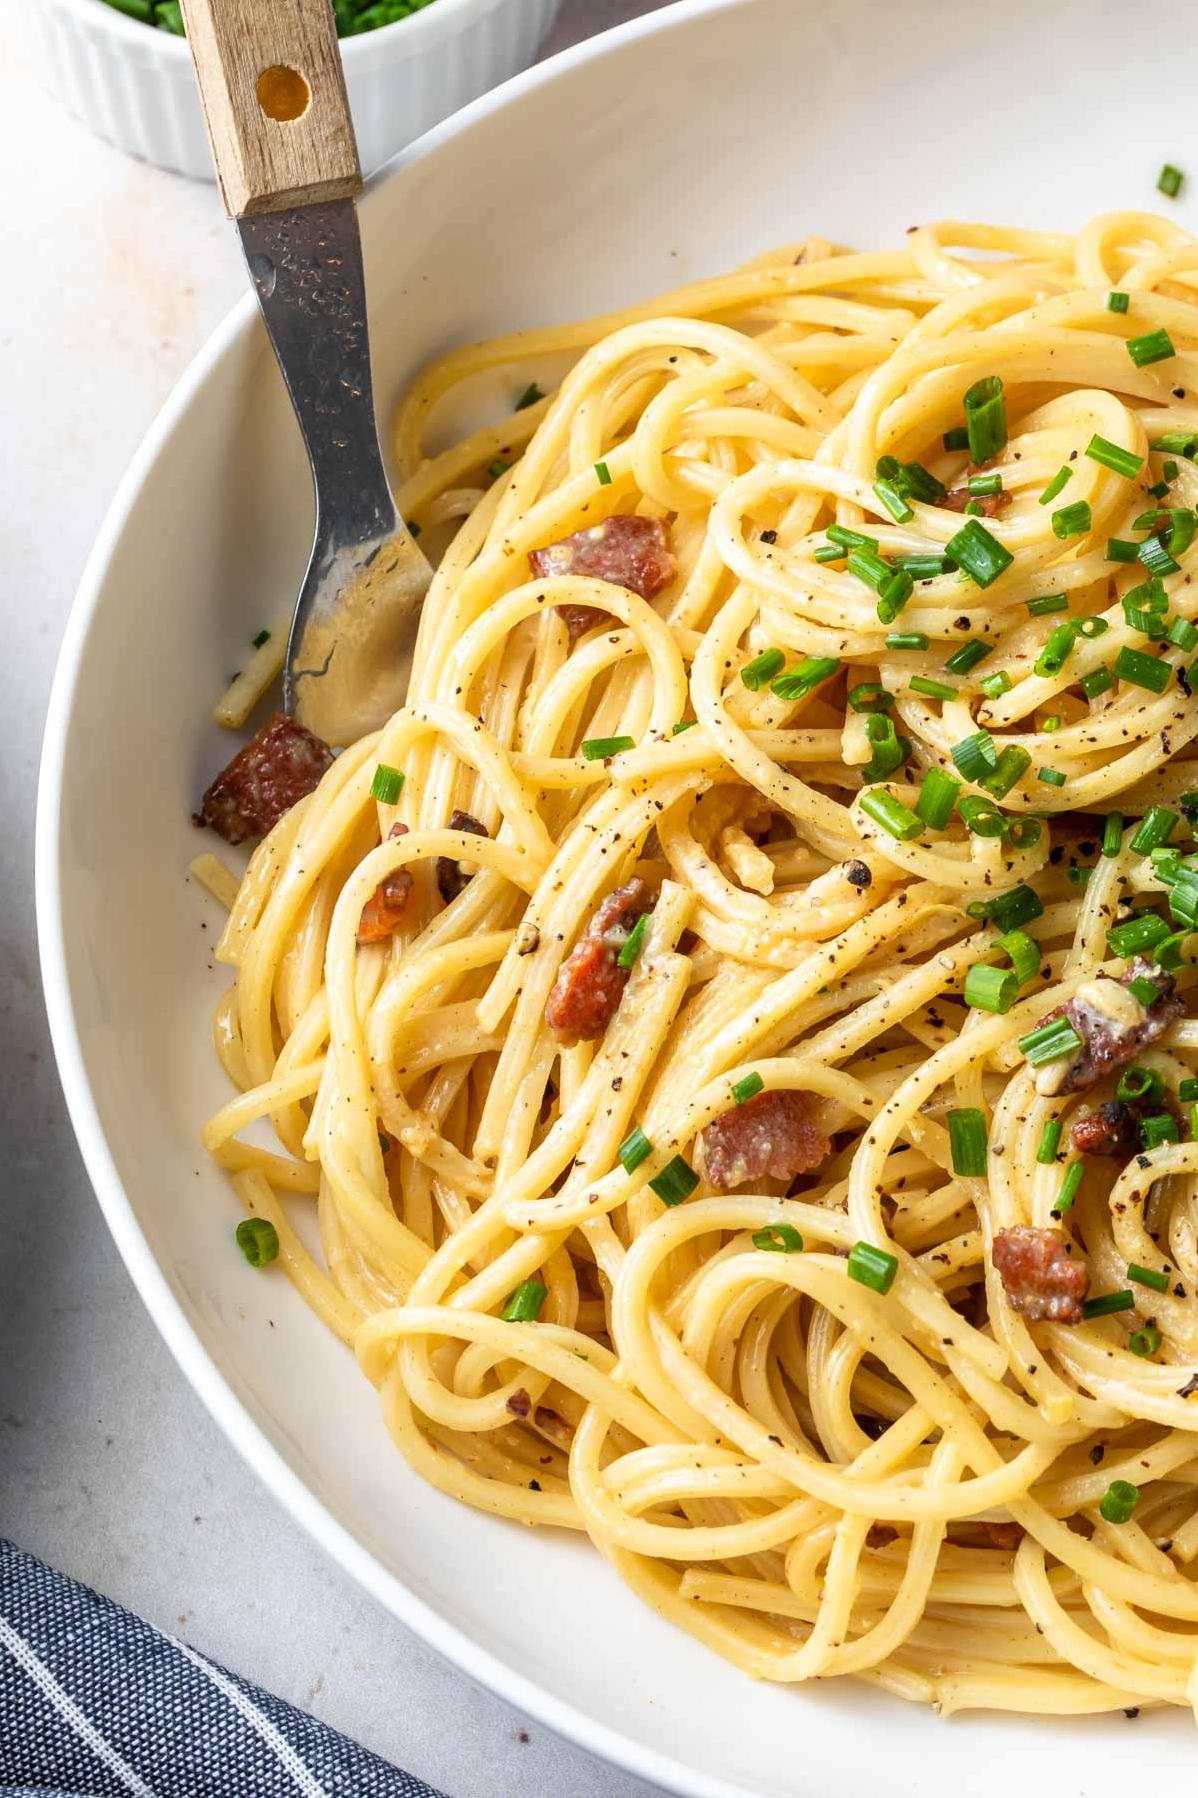  Perfectly cooked spaghetti with creamy sauce and lots of flavor